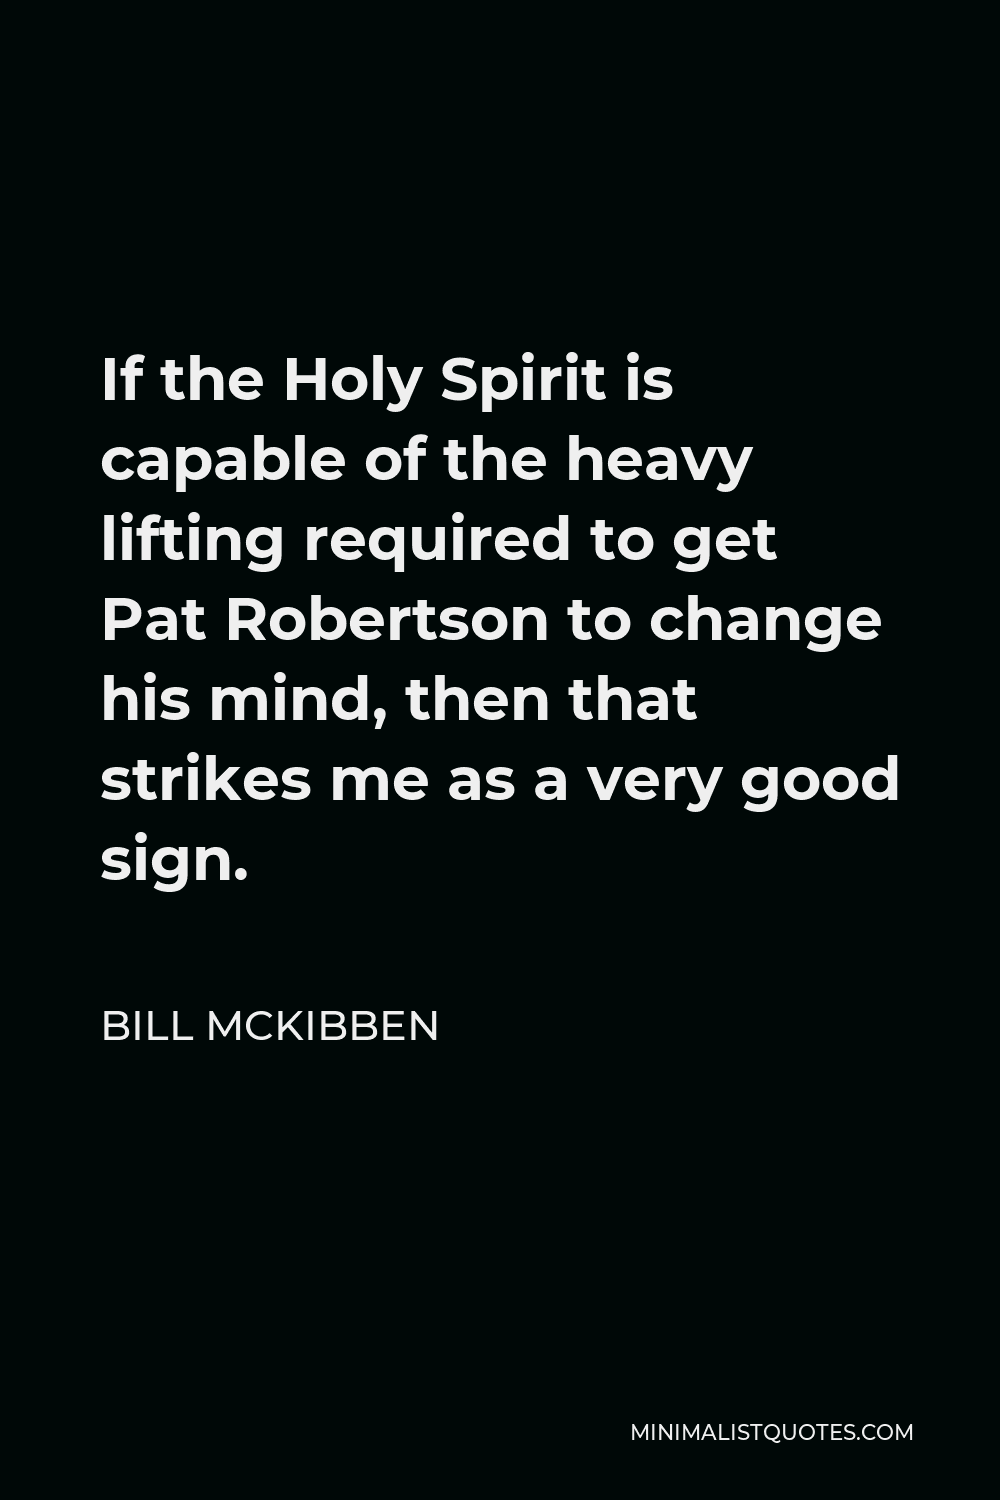 Bill McKibben Quote - If the Holy Spirit is capable of the heavy lifting required to get Pat Robertson to change his mind, then that strikes me as a very good sign.